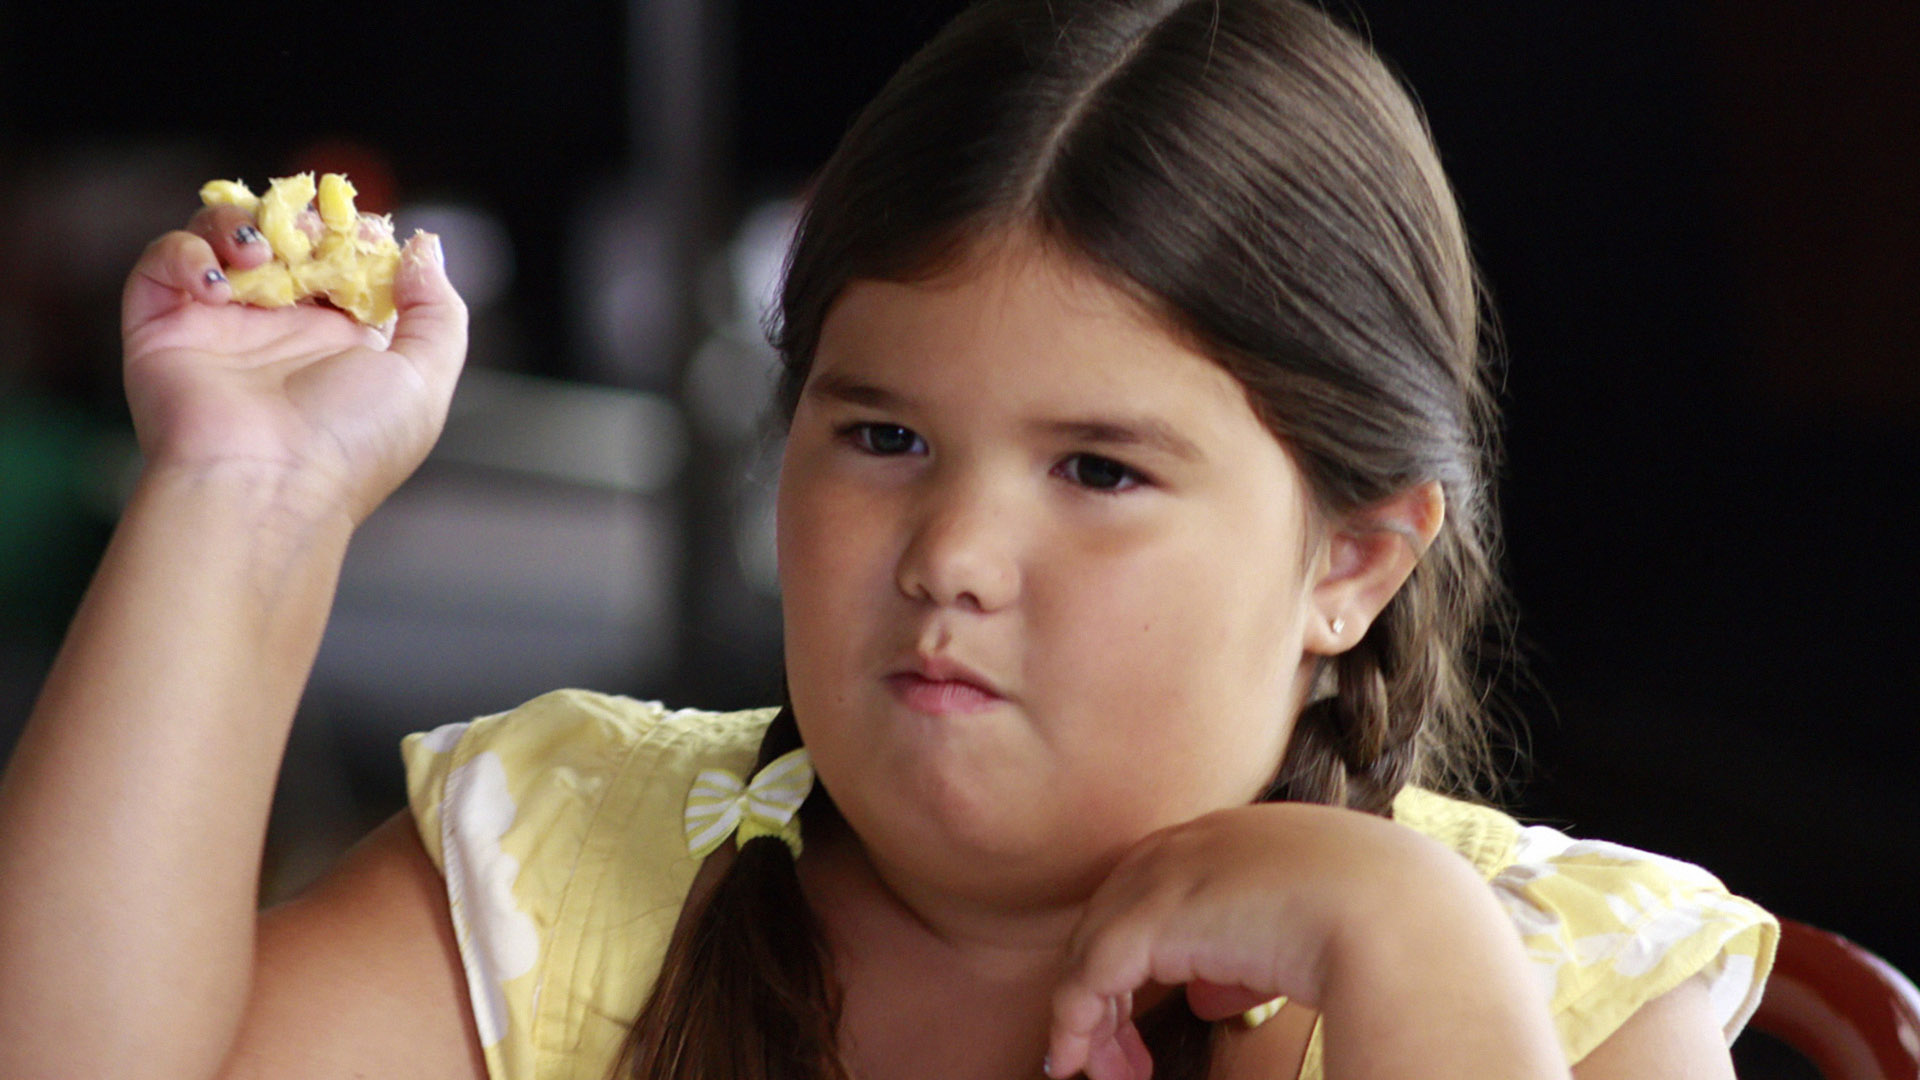 Madison De La Garza Went Through Hell During Her Time on Desperate Housewives